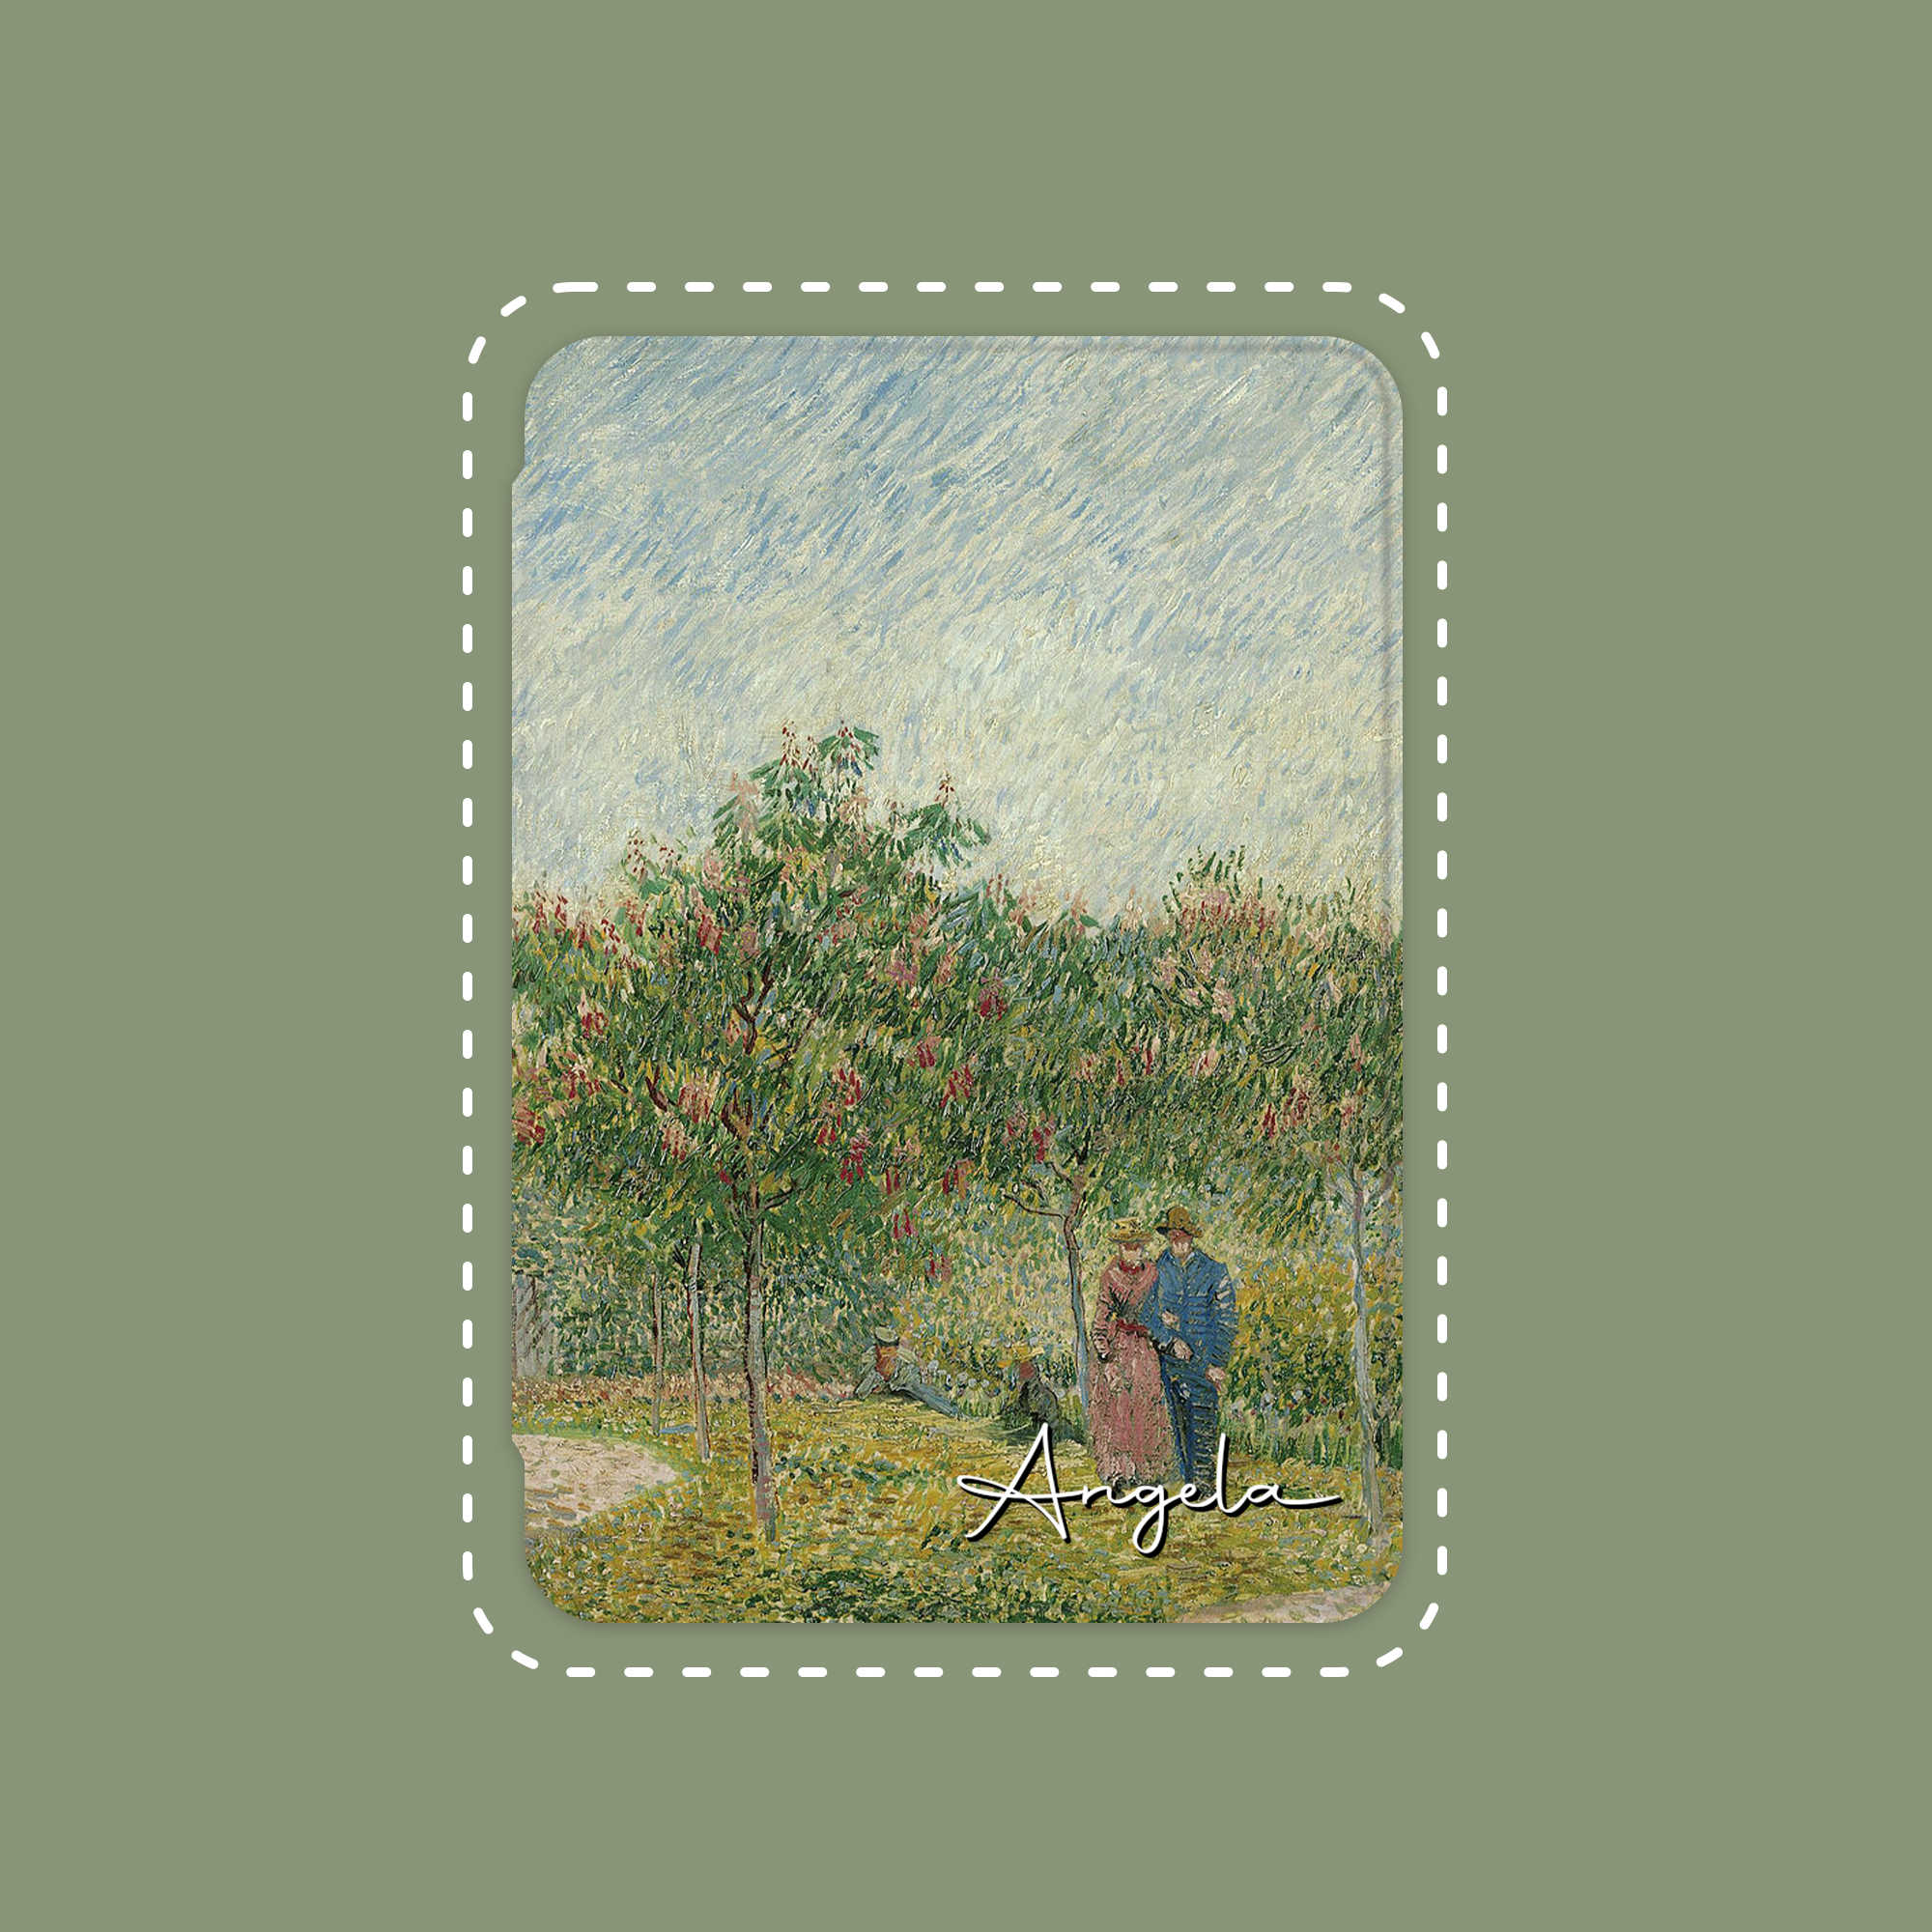 Customized Van Gogh Oil Painting Kindle Case Paperwhite Case